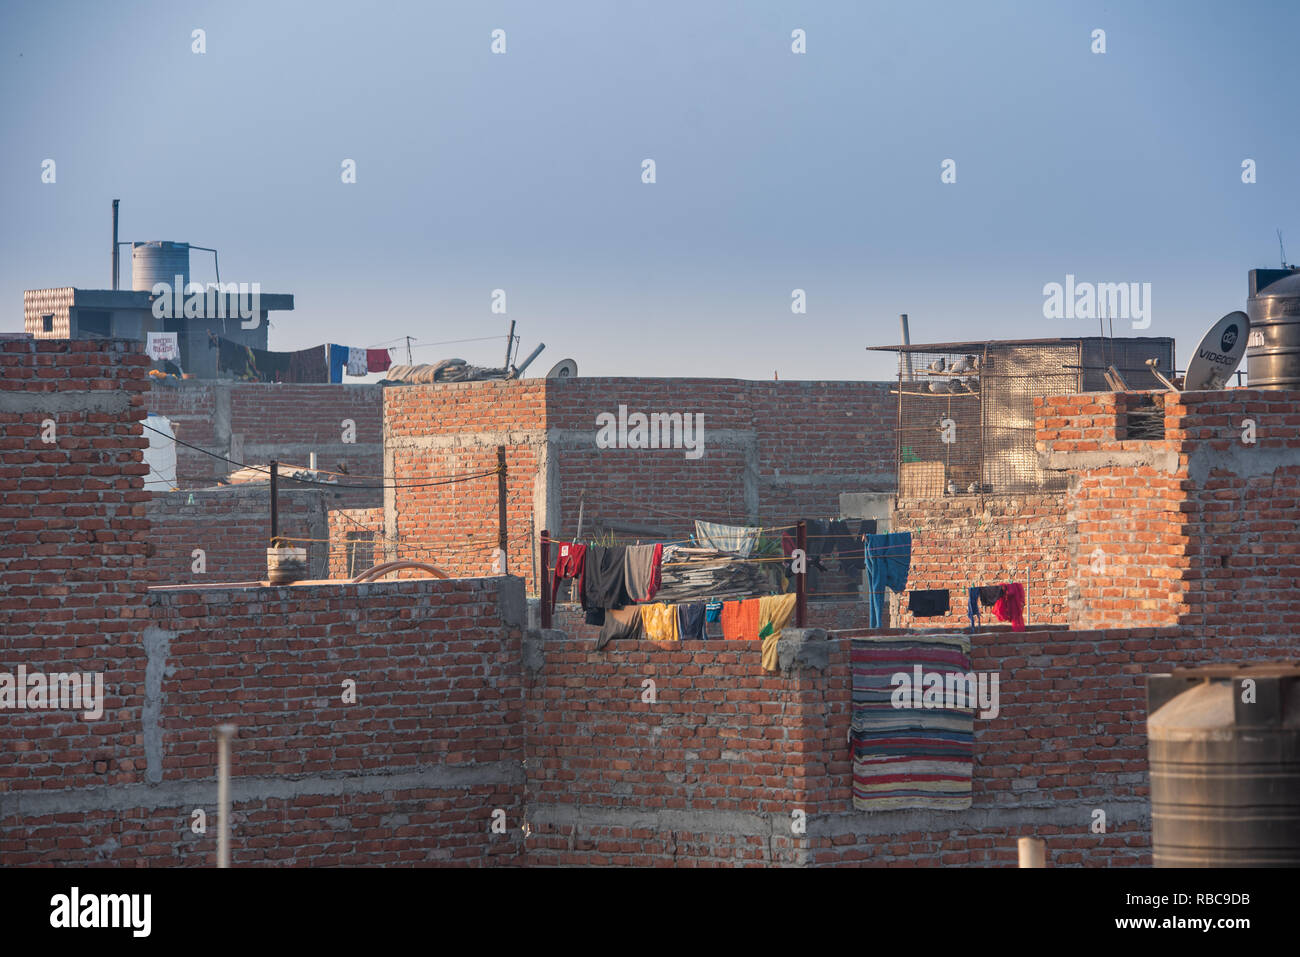 A sunny rooftop scene in JJ Colony Madanpur Khadar, New Delhi making a landscape of satellites dishes and water tanks with clothes drying. Stock Photo